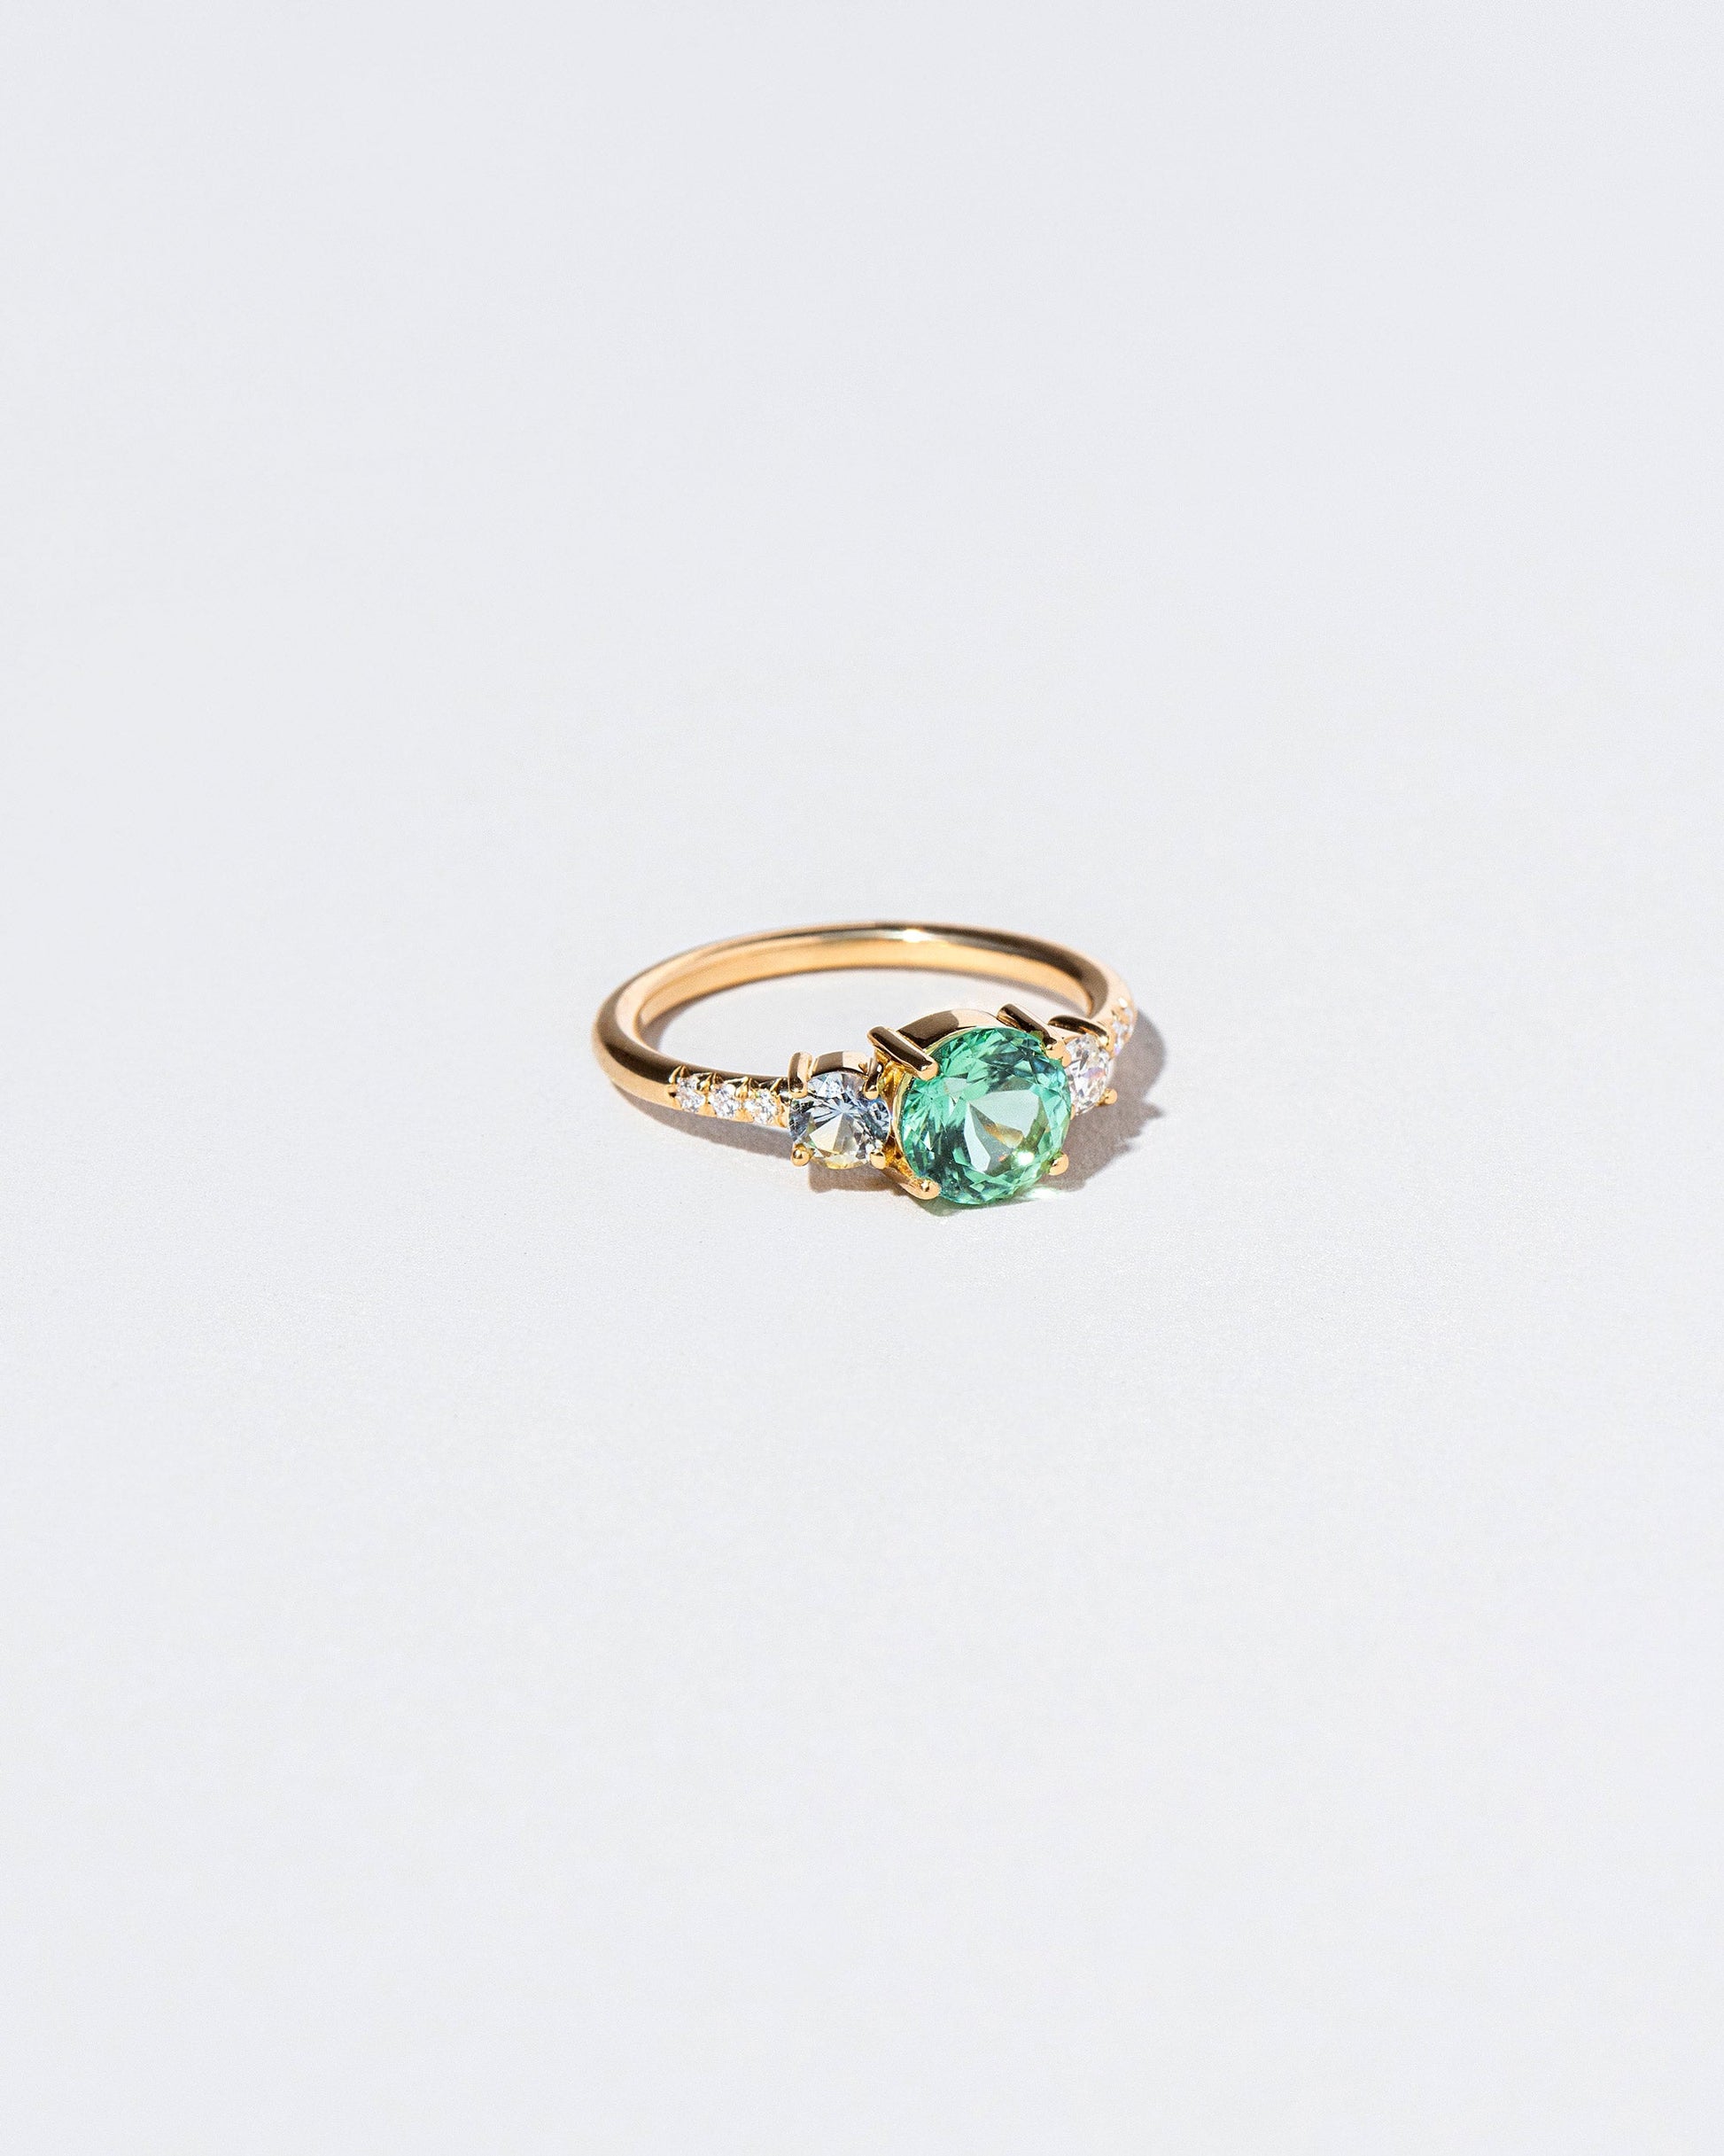  Orion Ring - Tourmaline on light color background.